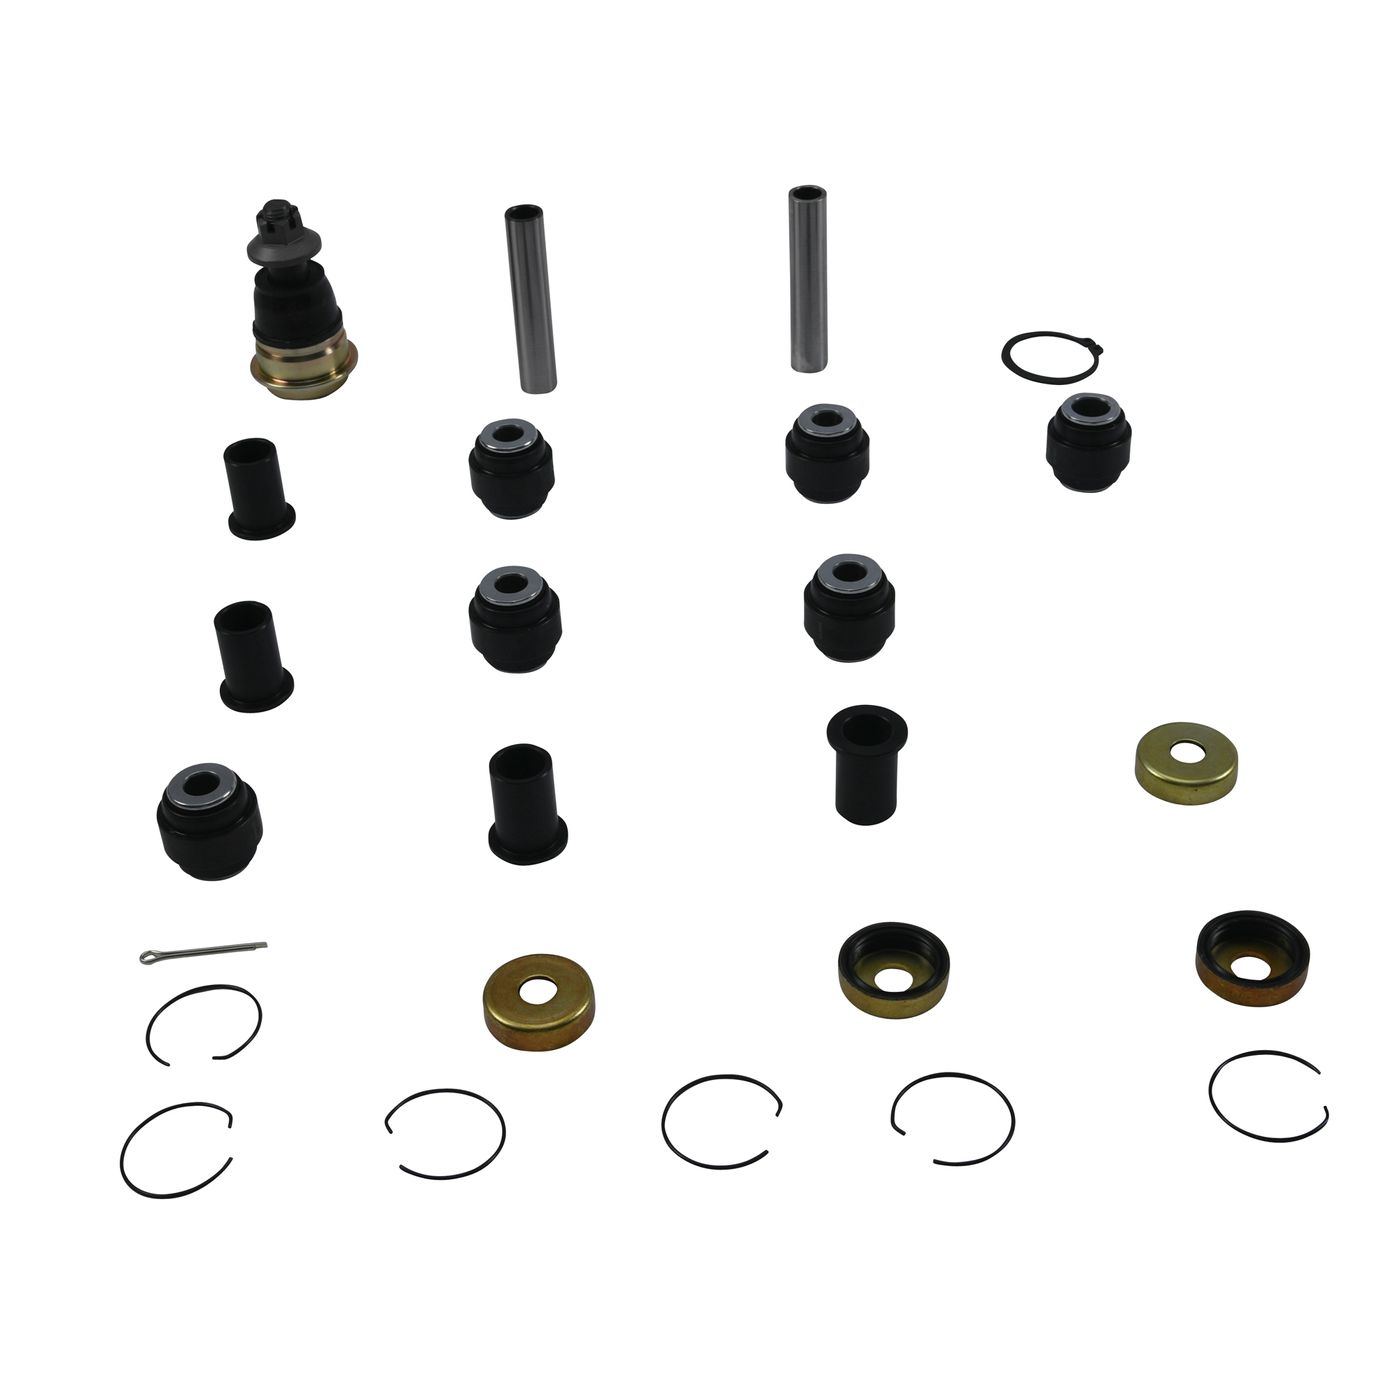 Wrp Rear Ind. Suspension Kits - WRP501236 image